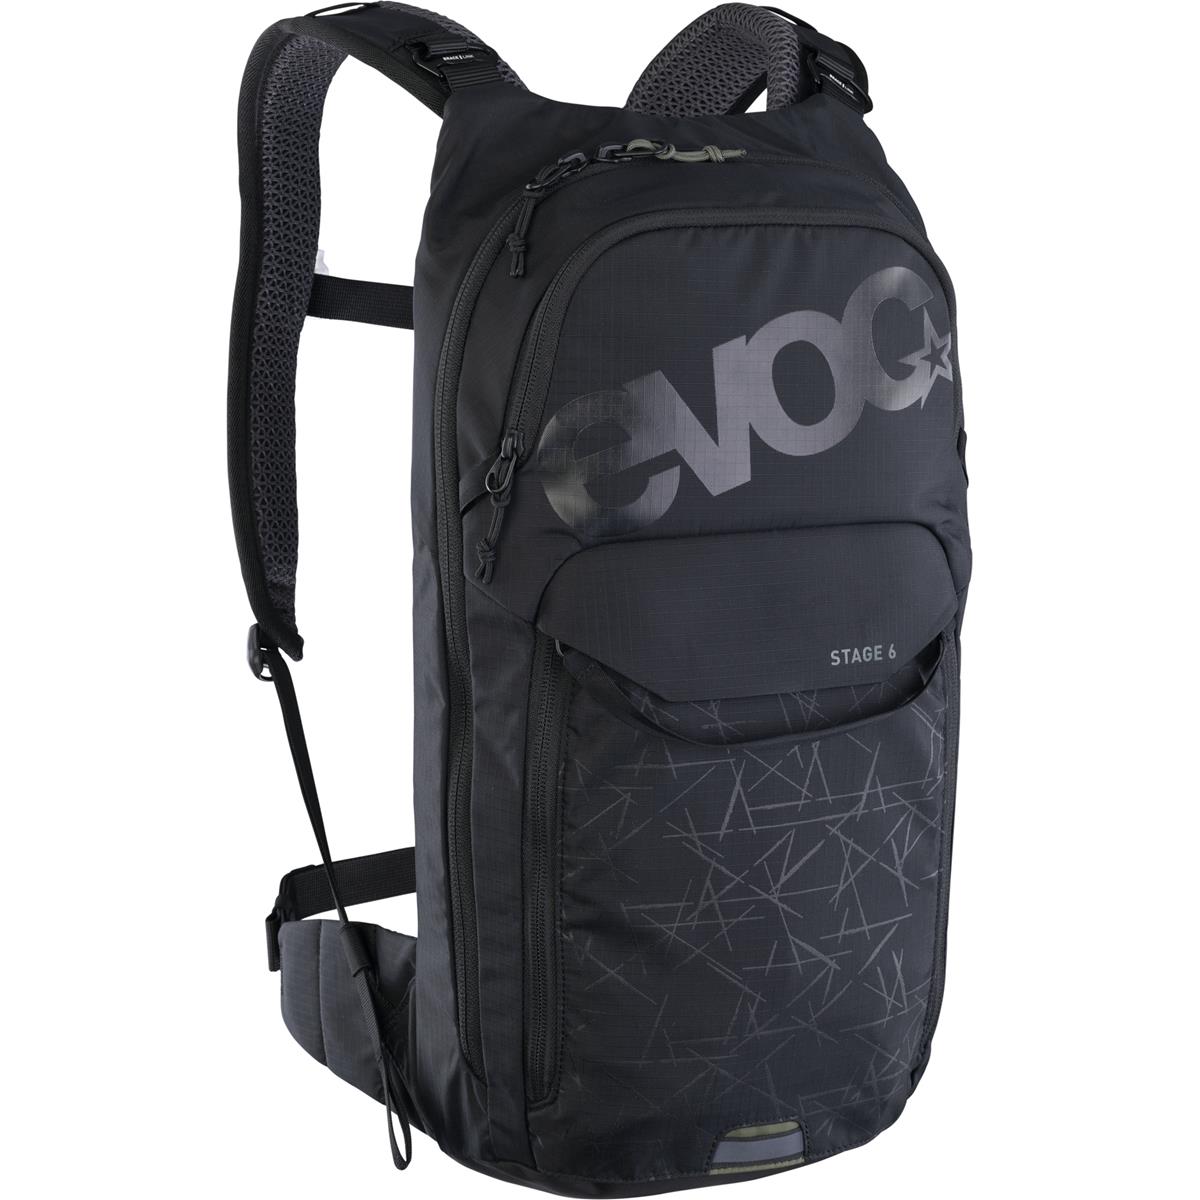 Evoc Backpack with Hydration System Compartment Stage 6 + Black